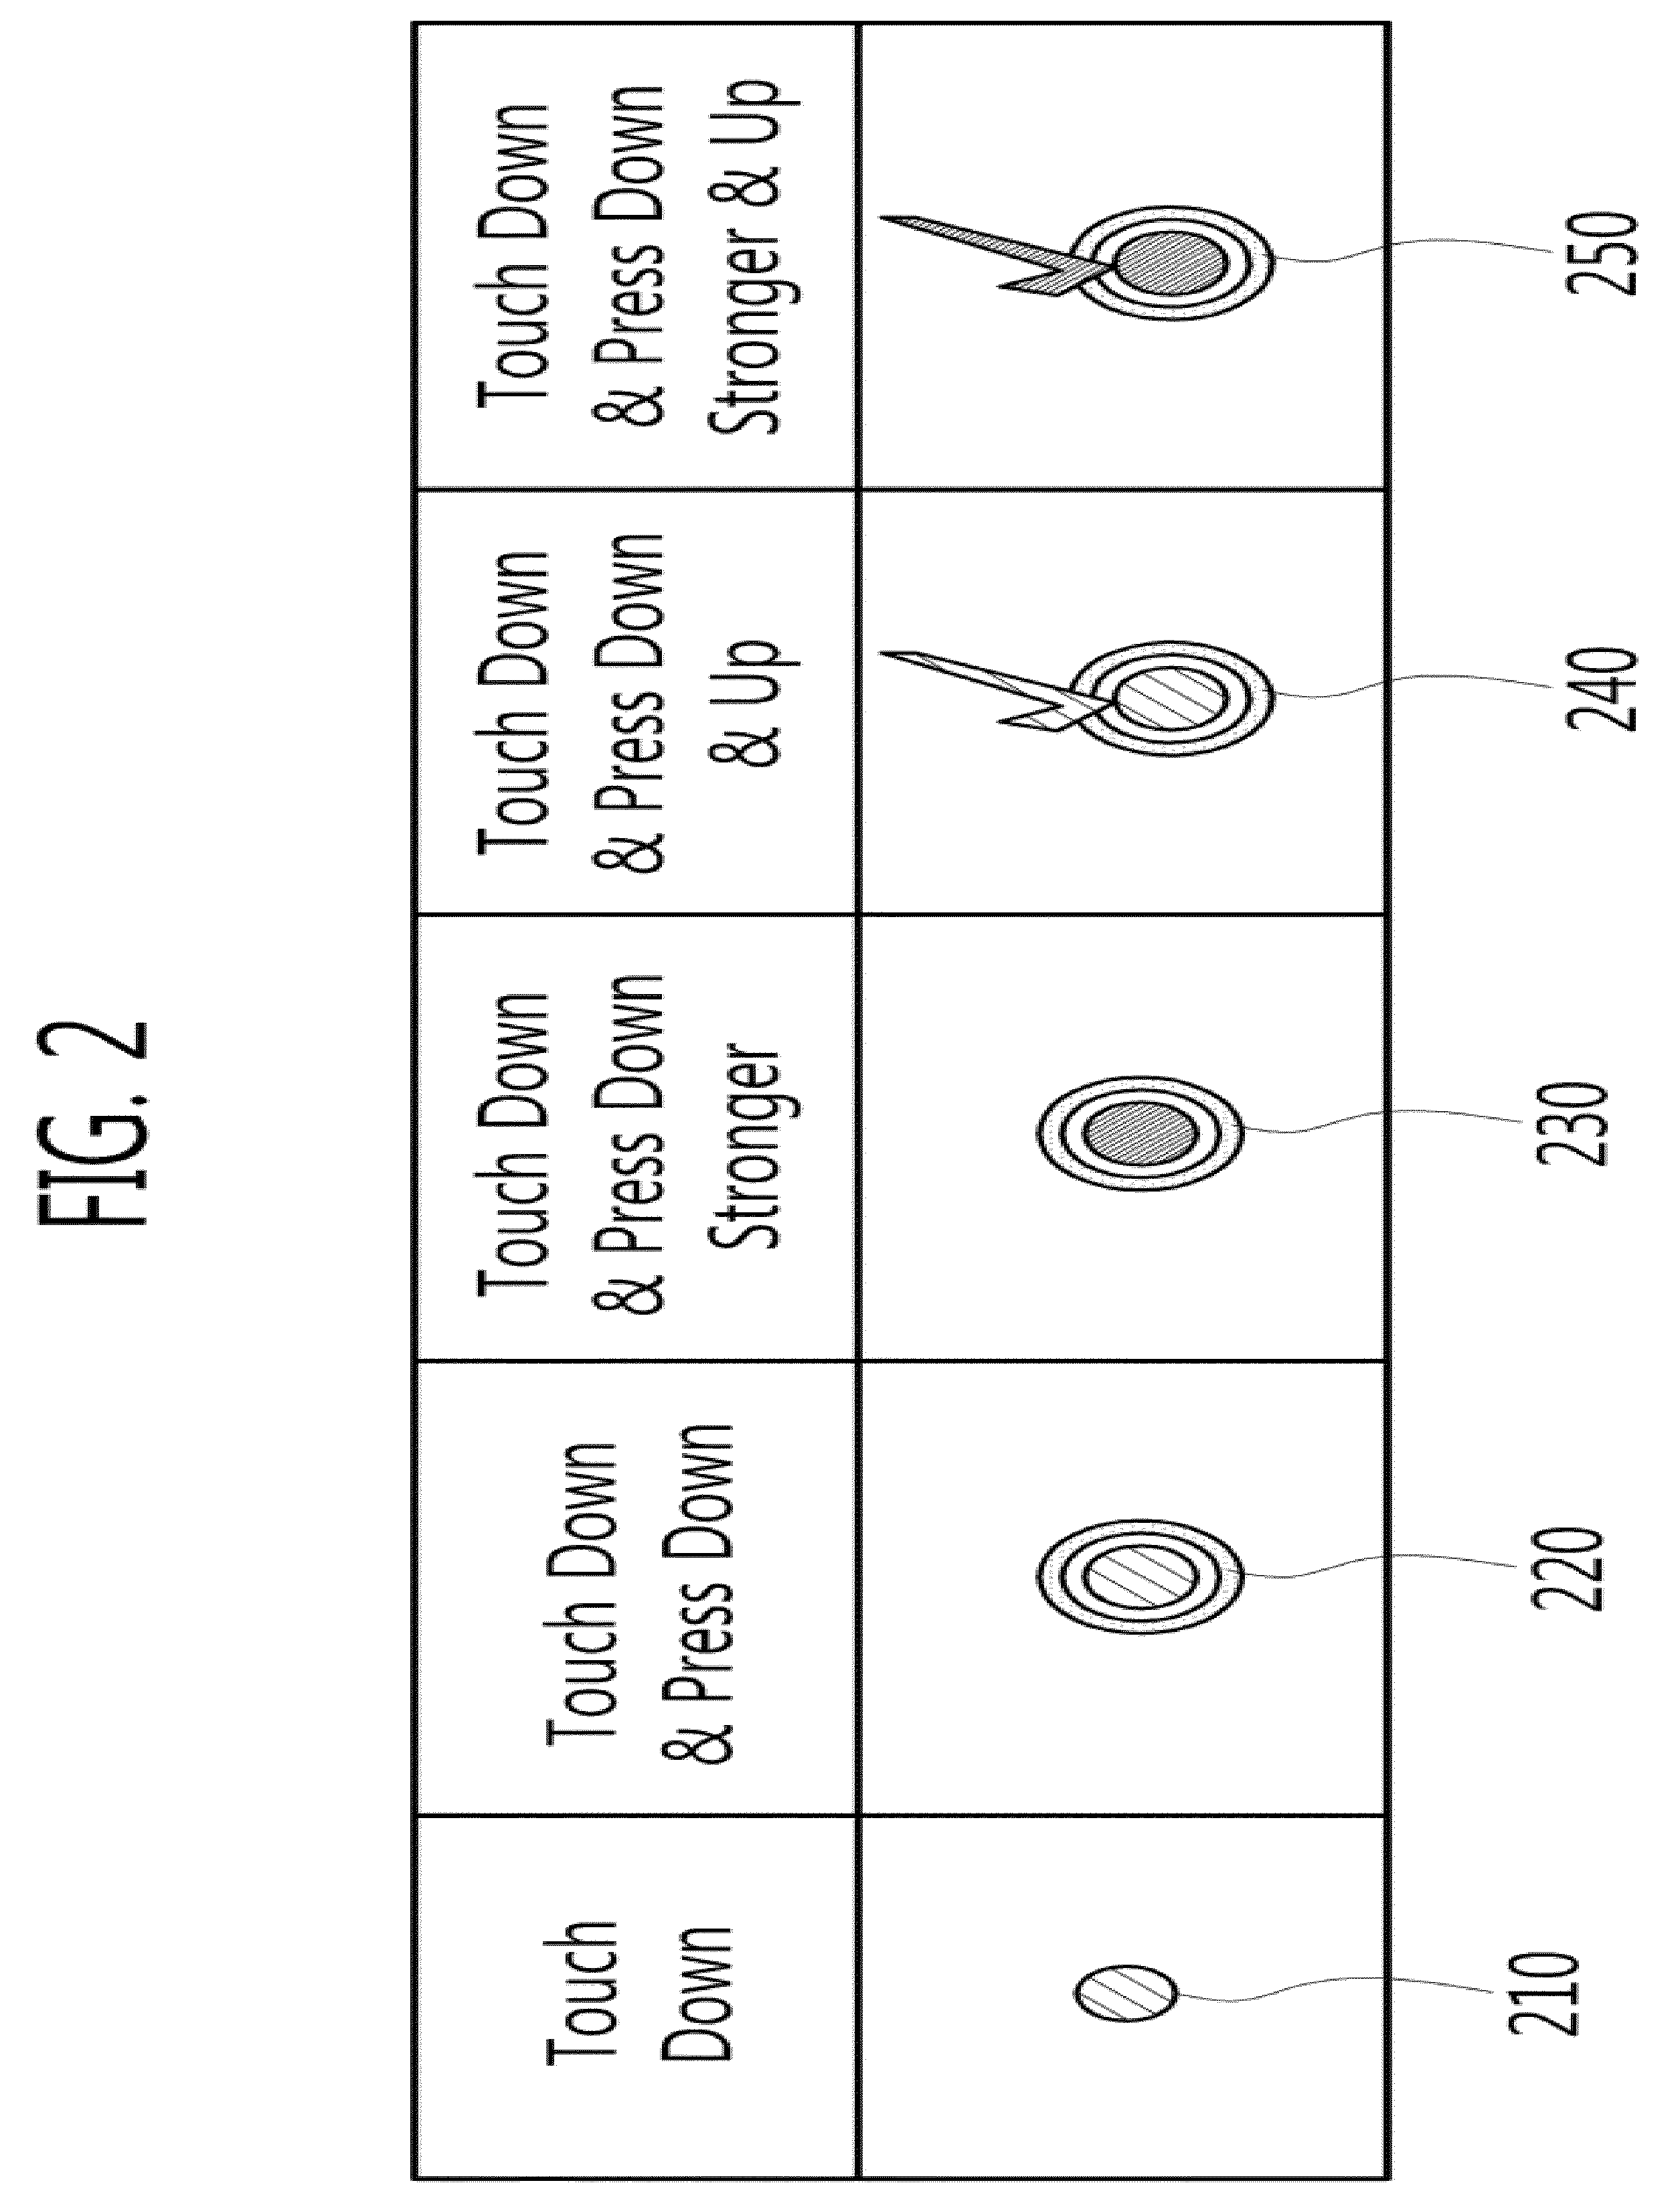 Method for providing a user interface based on touch pressure, and electronic device using same